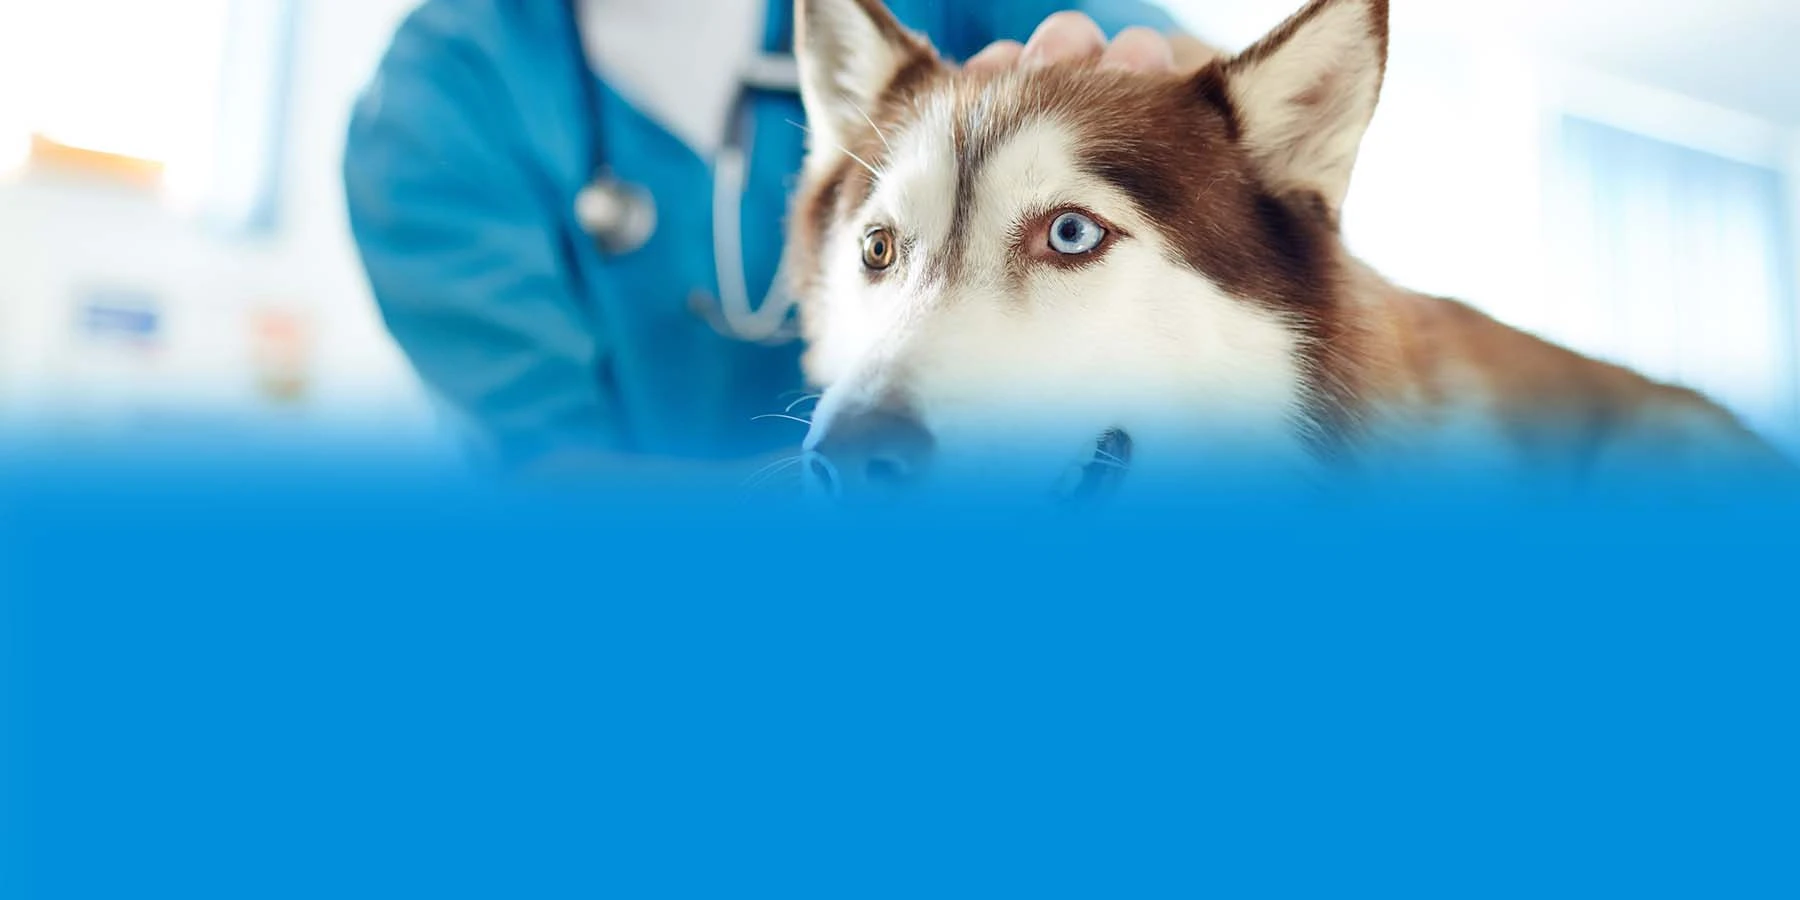 A Husky being examined by a veterinarian.